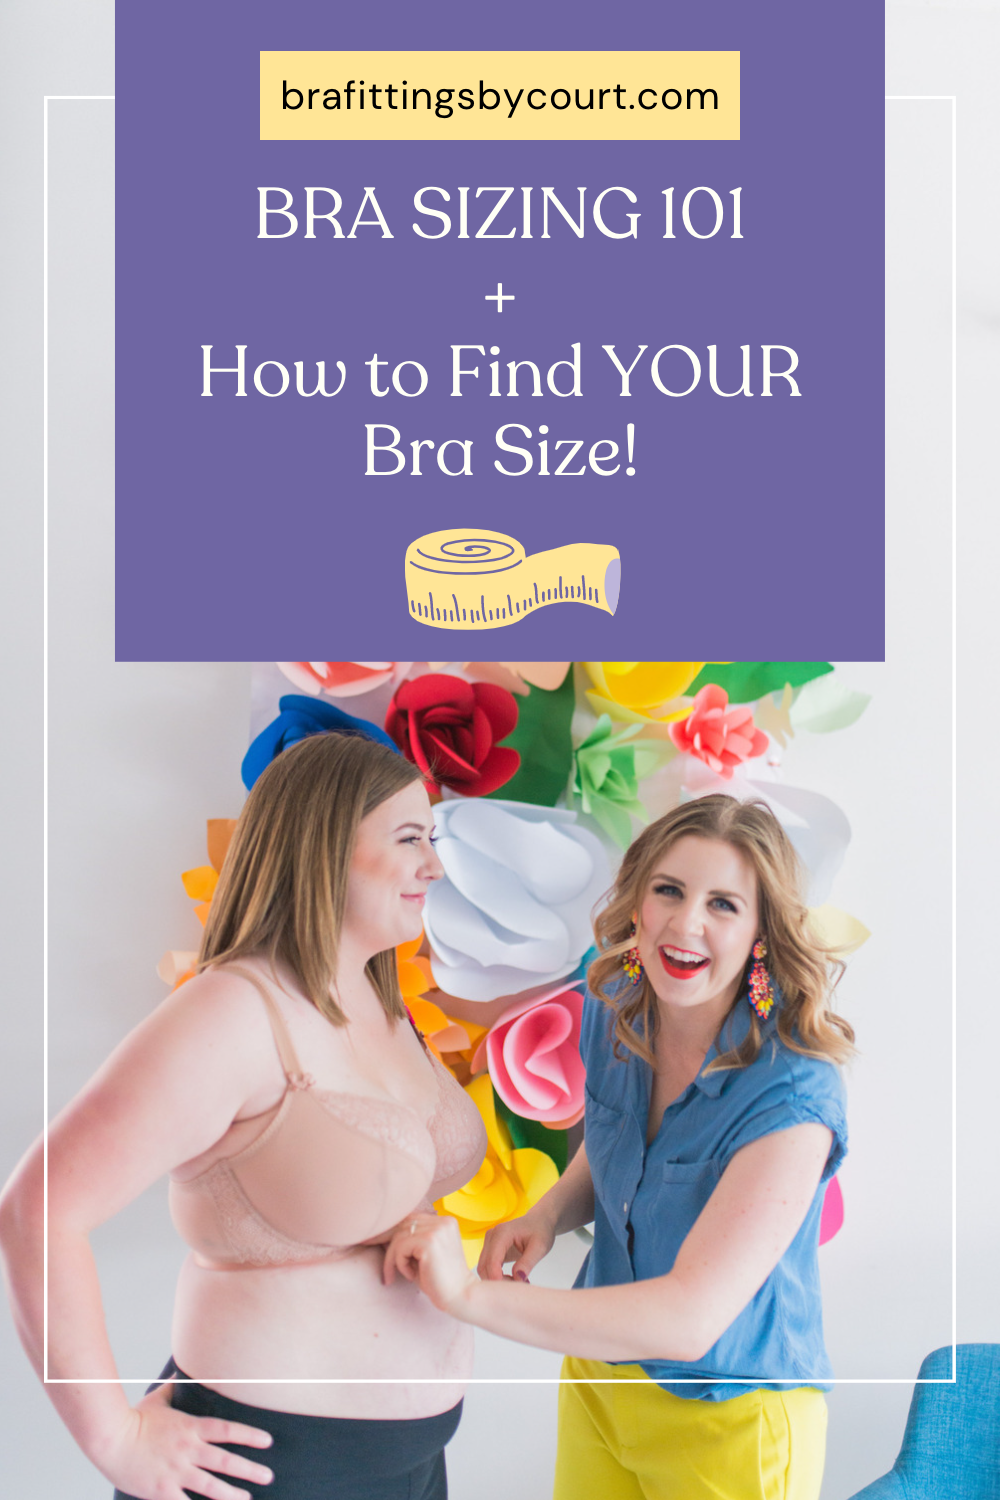 OK, Here Is What You Should Know About Bra Sizing